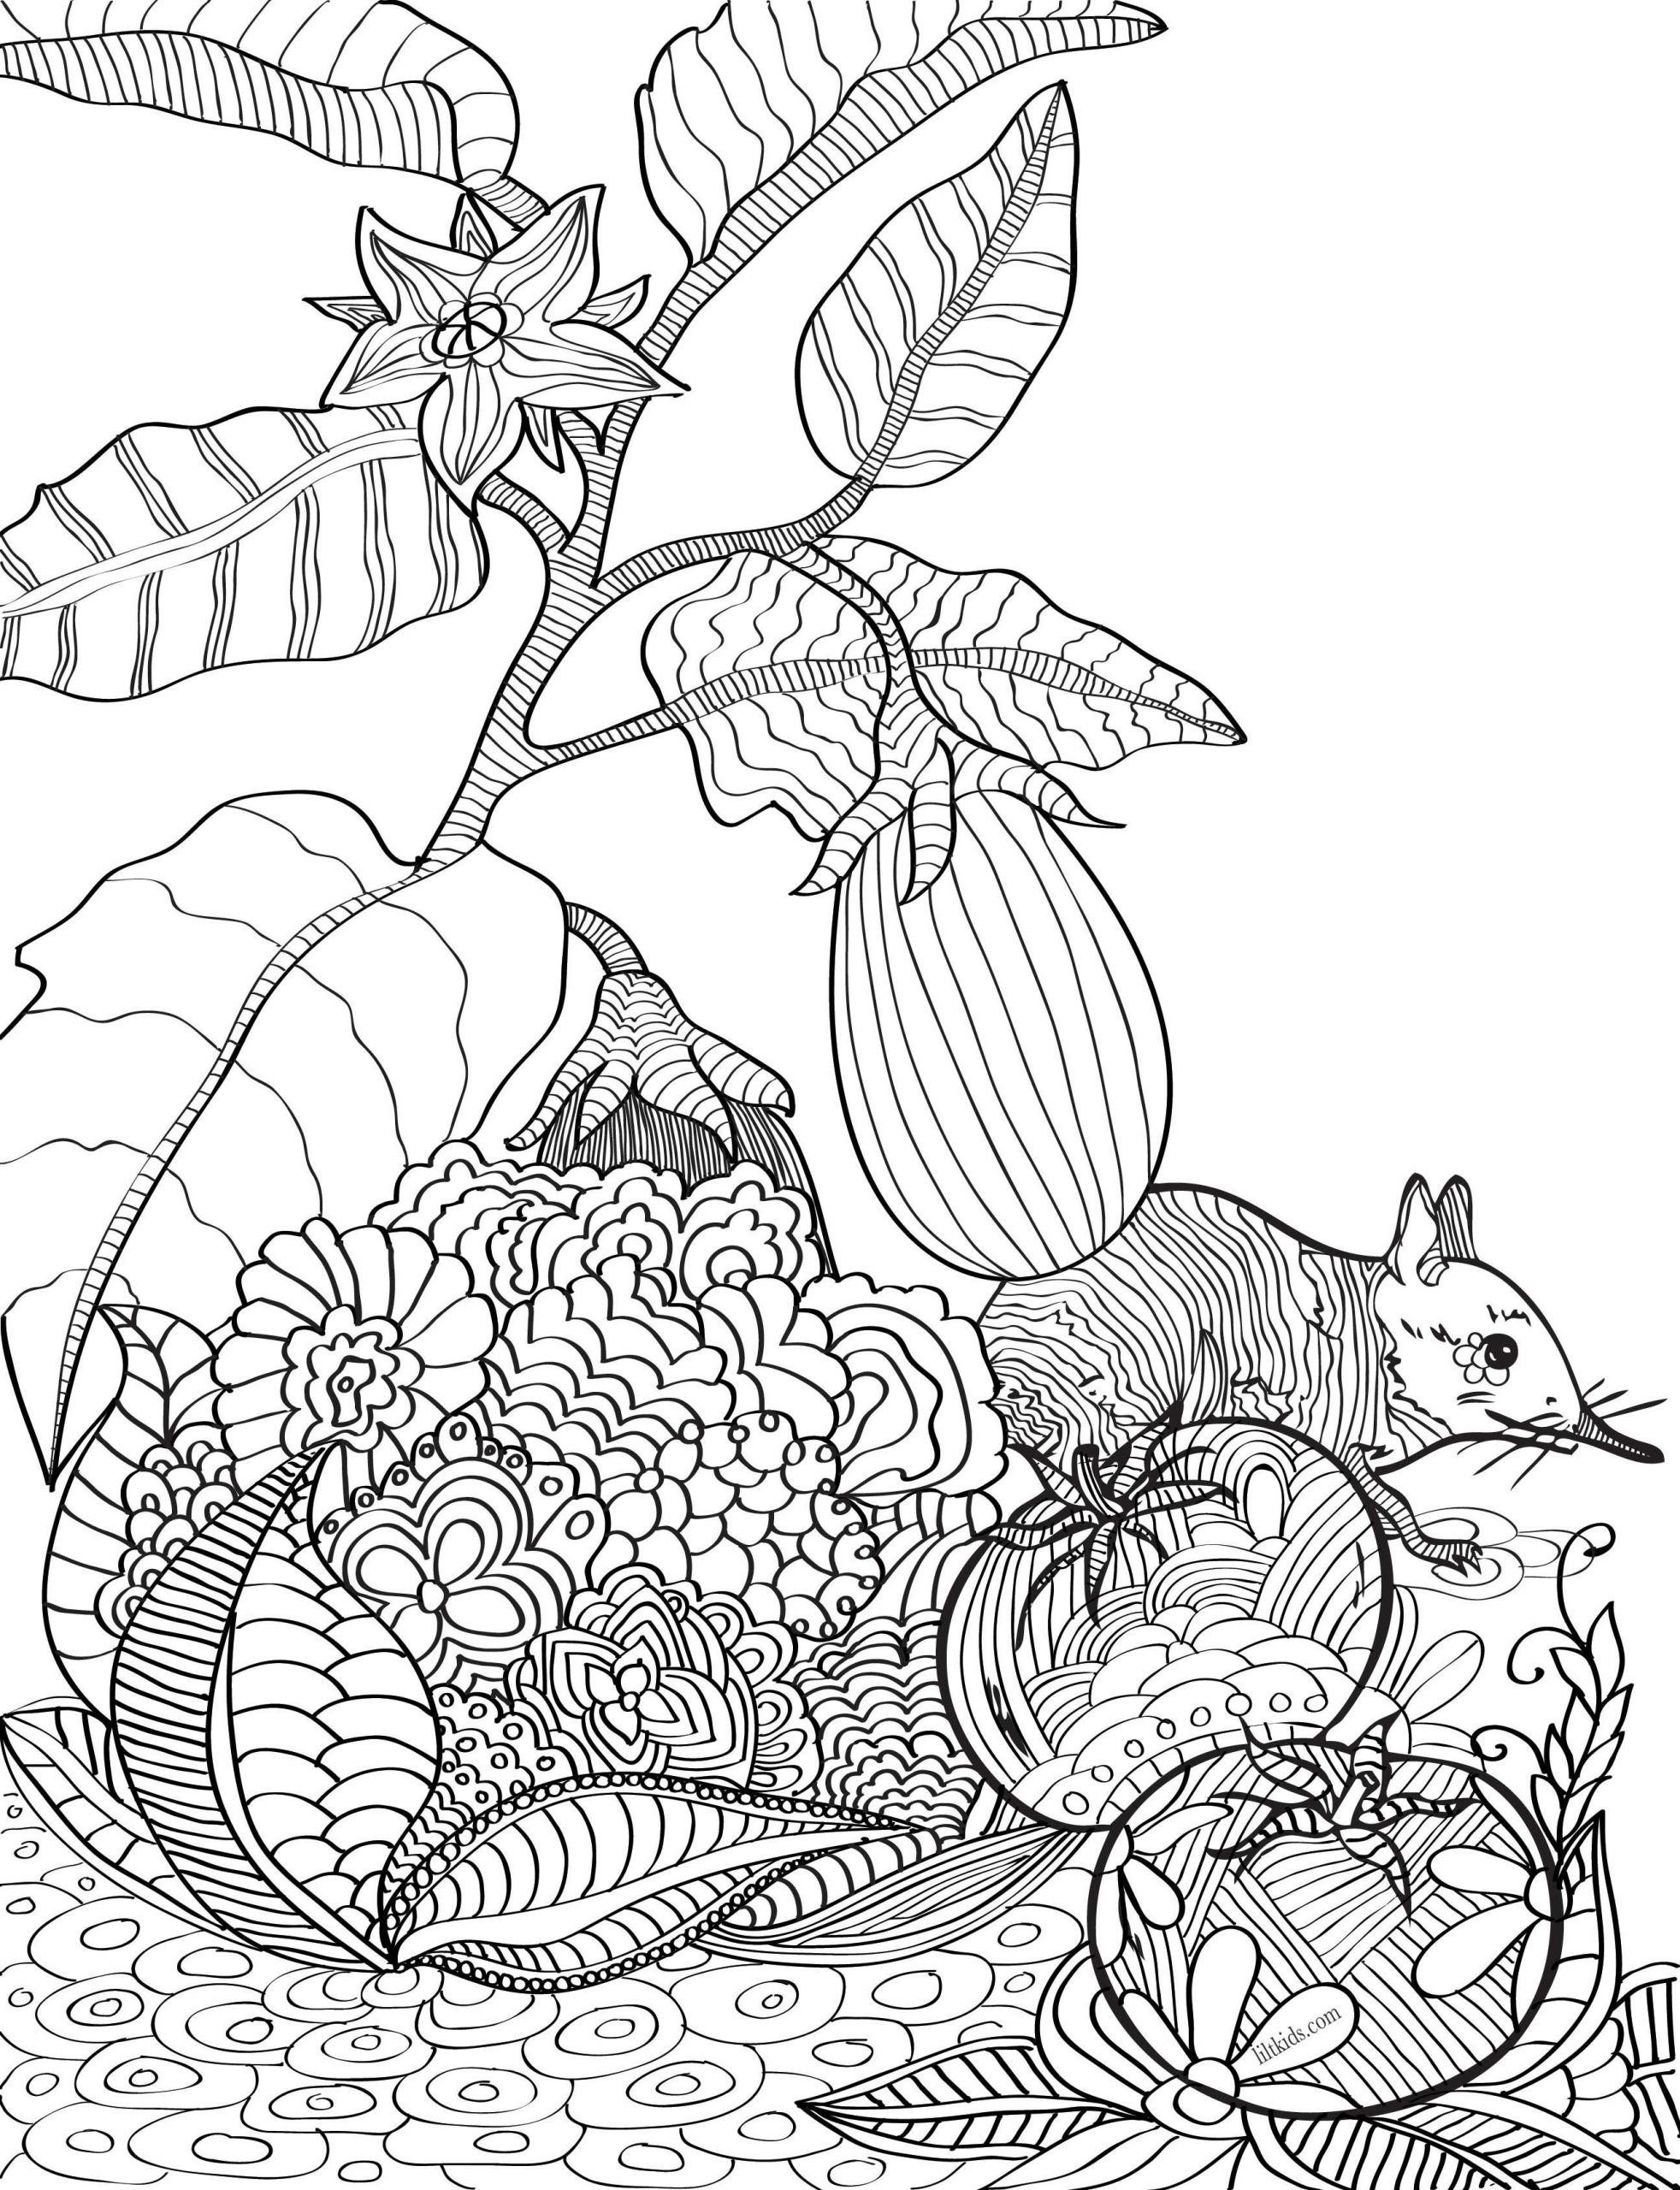 Lilt Kids Coloring Books
 Free garden adult coloring book image from LiltKids